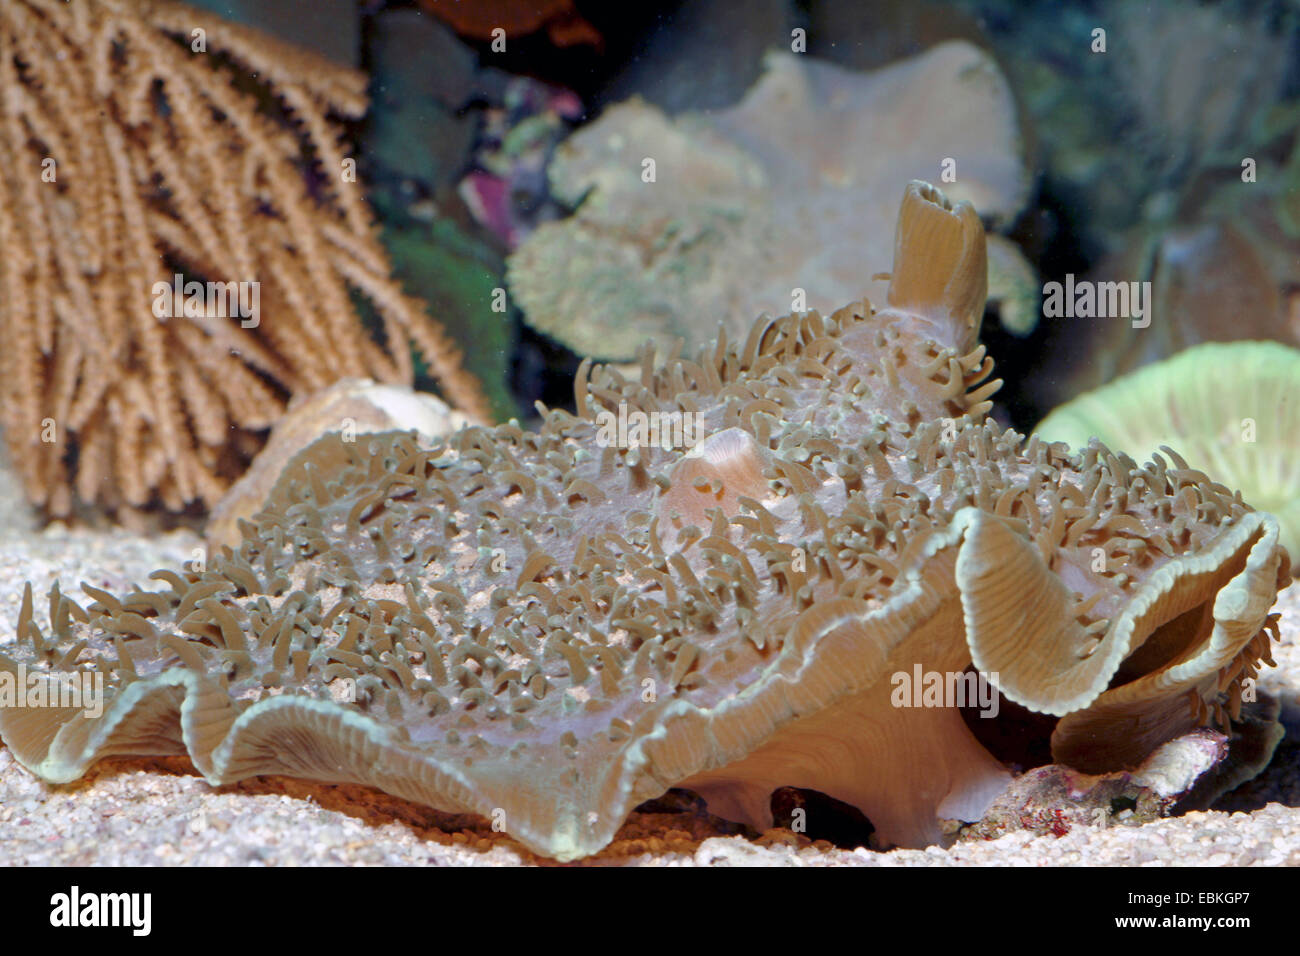 Giant Cup, Giant Elephant Ear Mushroom Coral (Amplexidiscus fenestrafer), close-up view Stock Photo